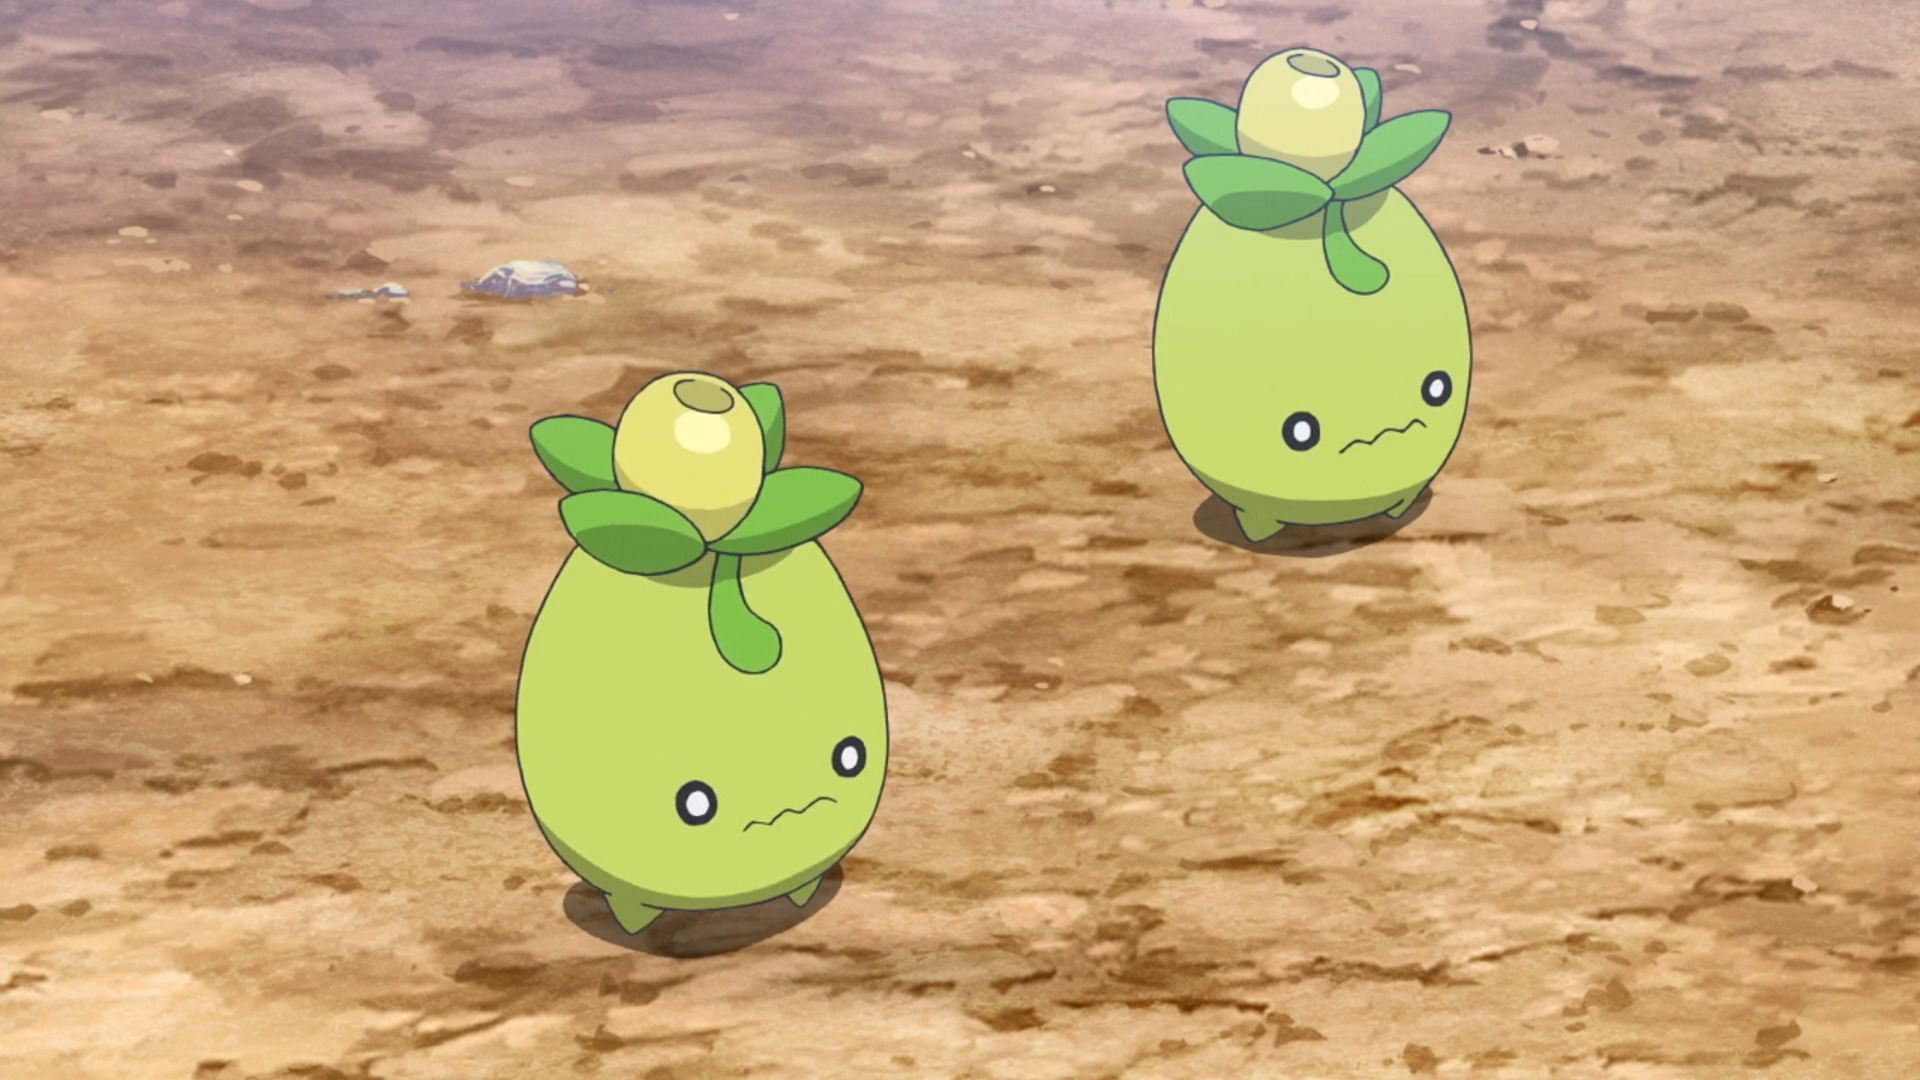 Smoliv as seen in the anime (Image via The Pokemon Company)